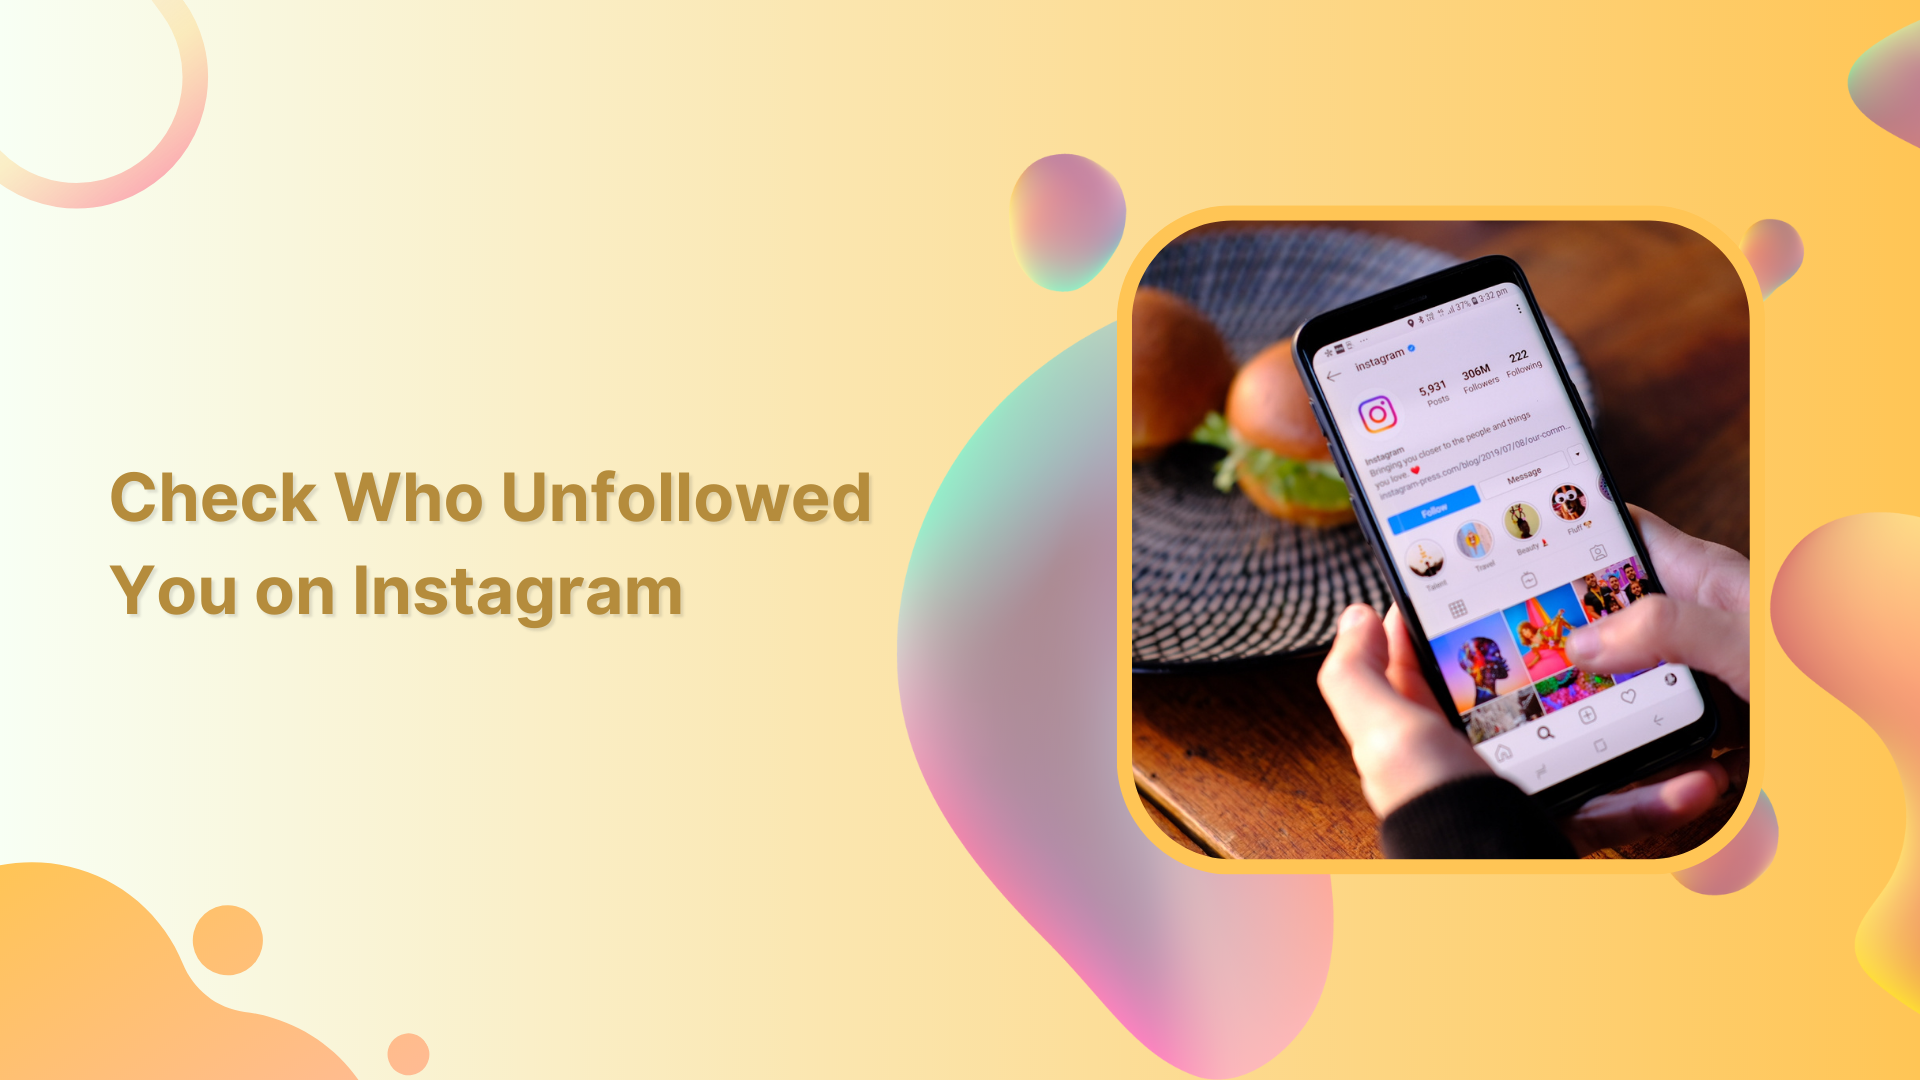 How to Check Who Unfollowed You on Instagram